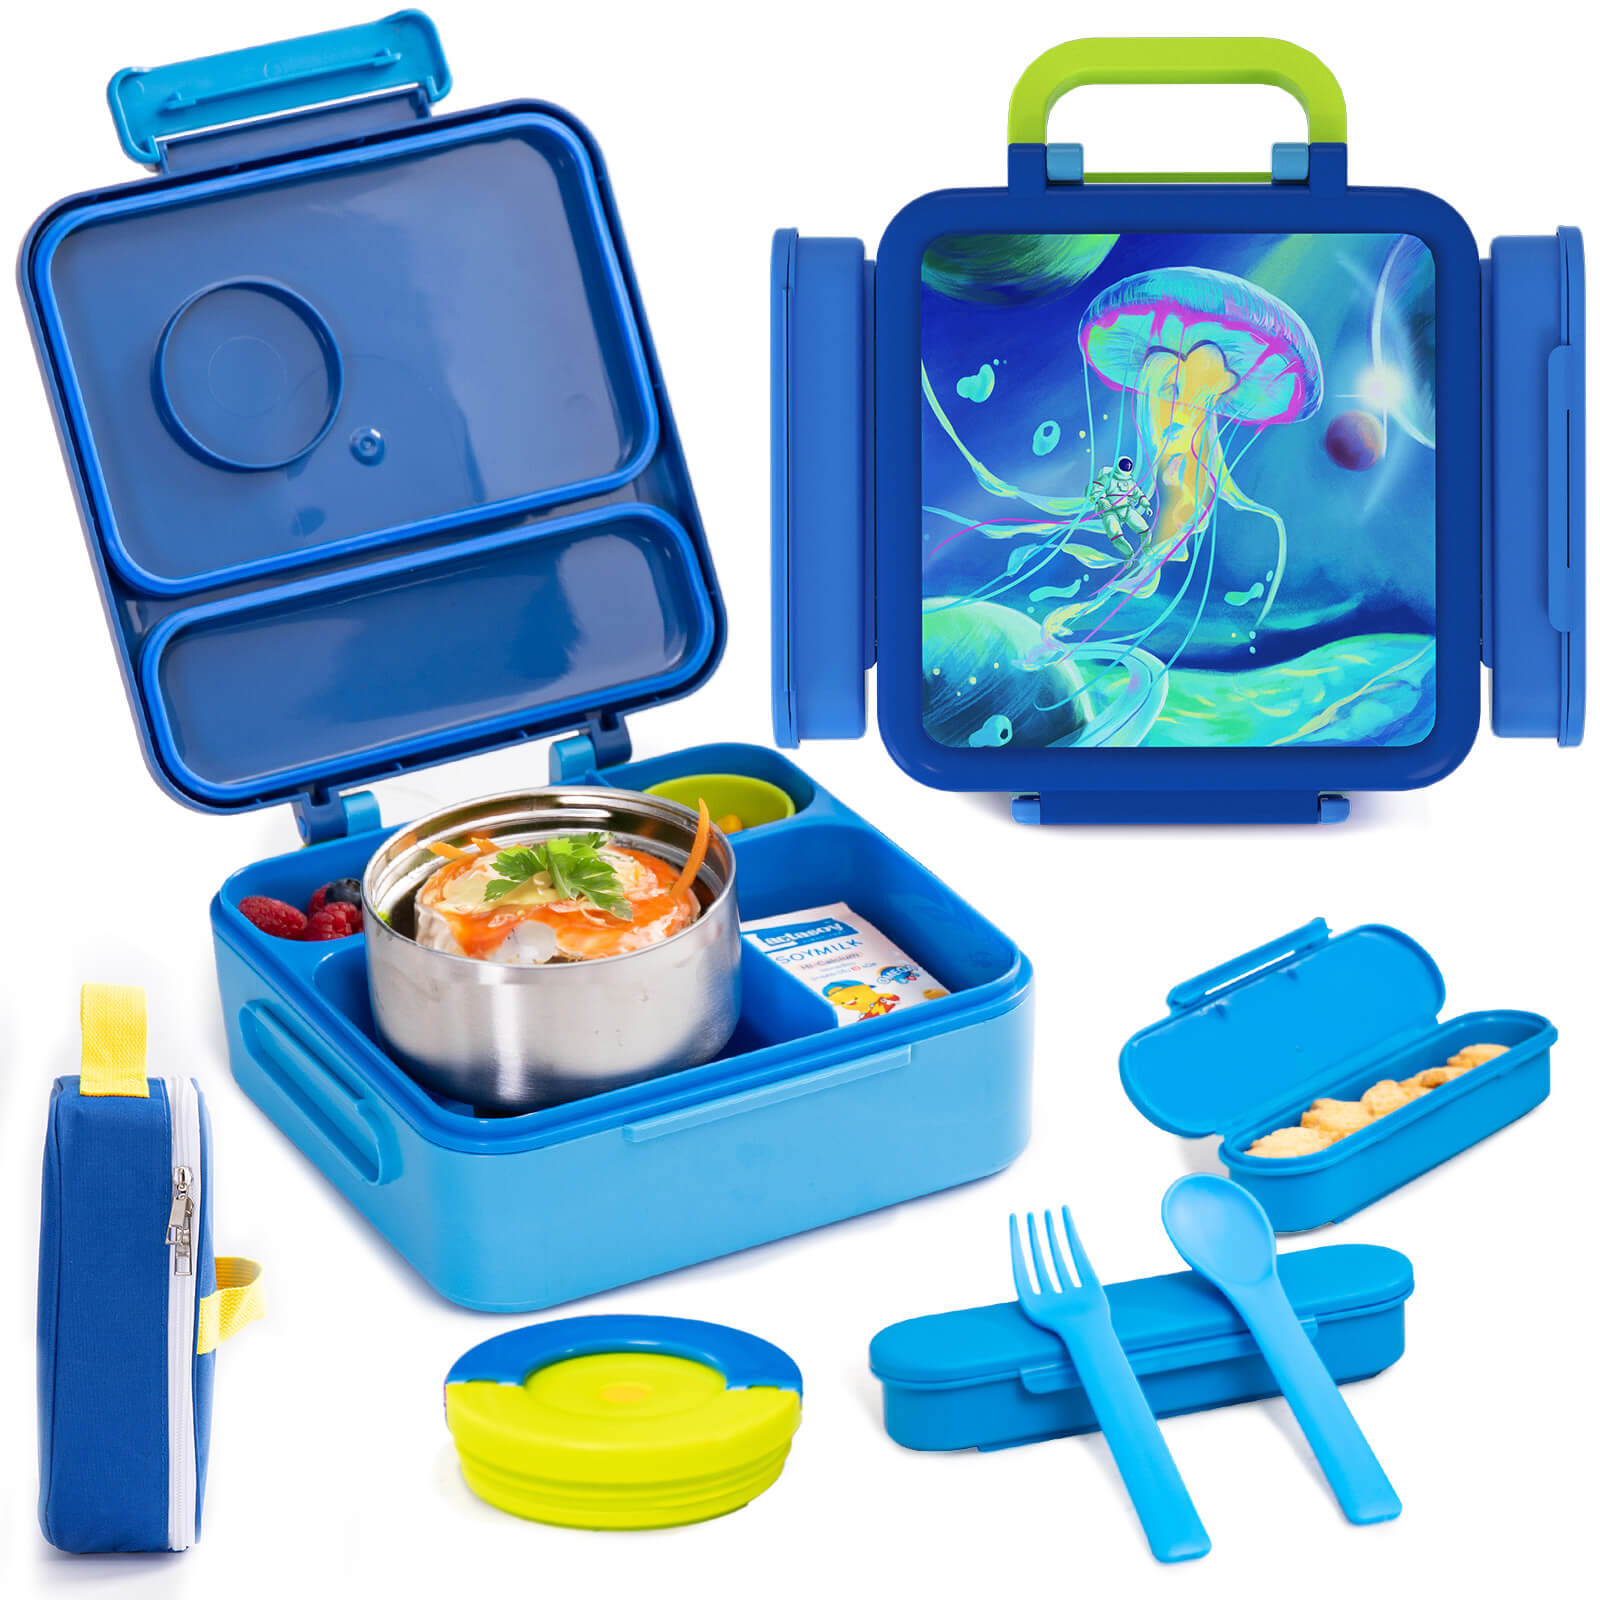 Looking at thermal bento sets and lunch jars